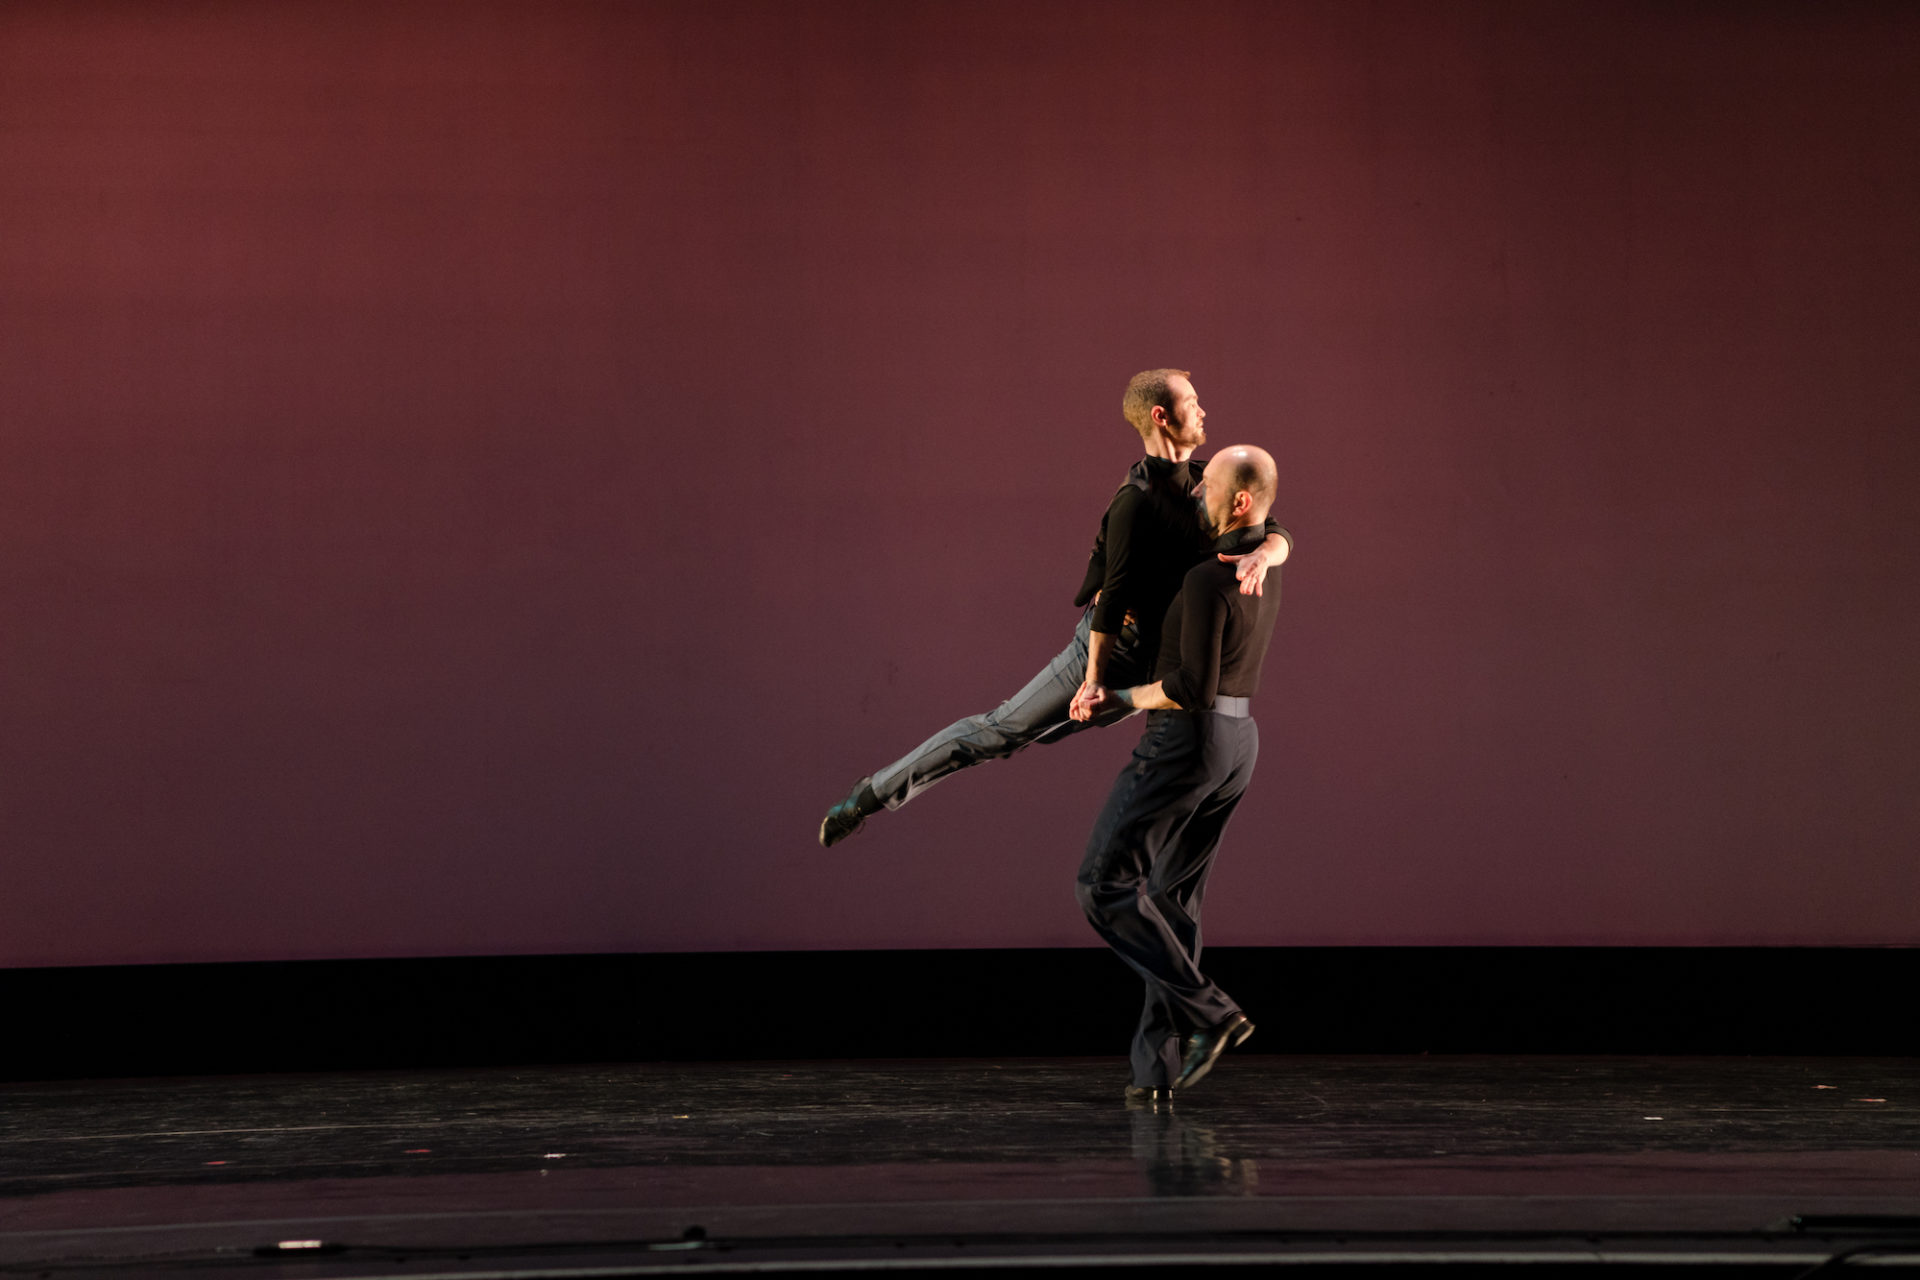 Alex Tecza and Kato Lindholm dance on stage at The Virginia. They wear matching grey pants and black shirts. Tecza is holding Lindholm as they spin around with Lindholm's leg extending out.